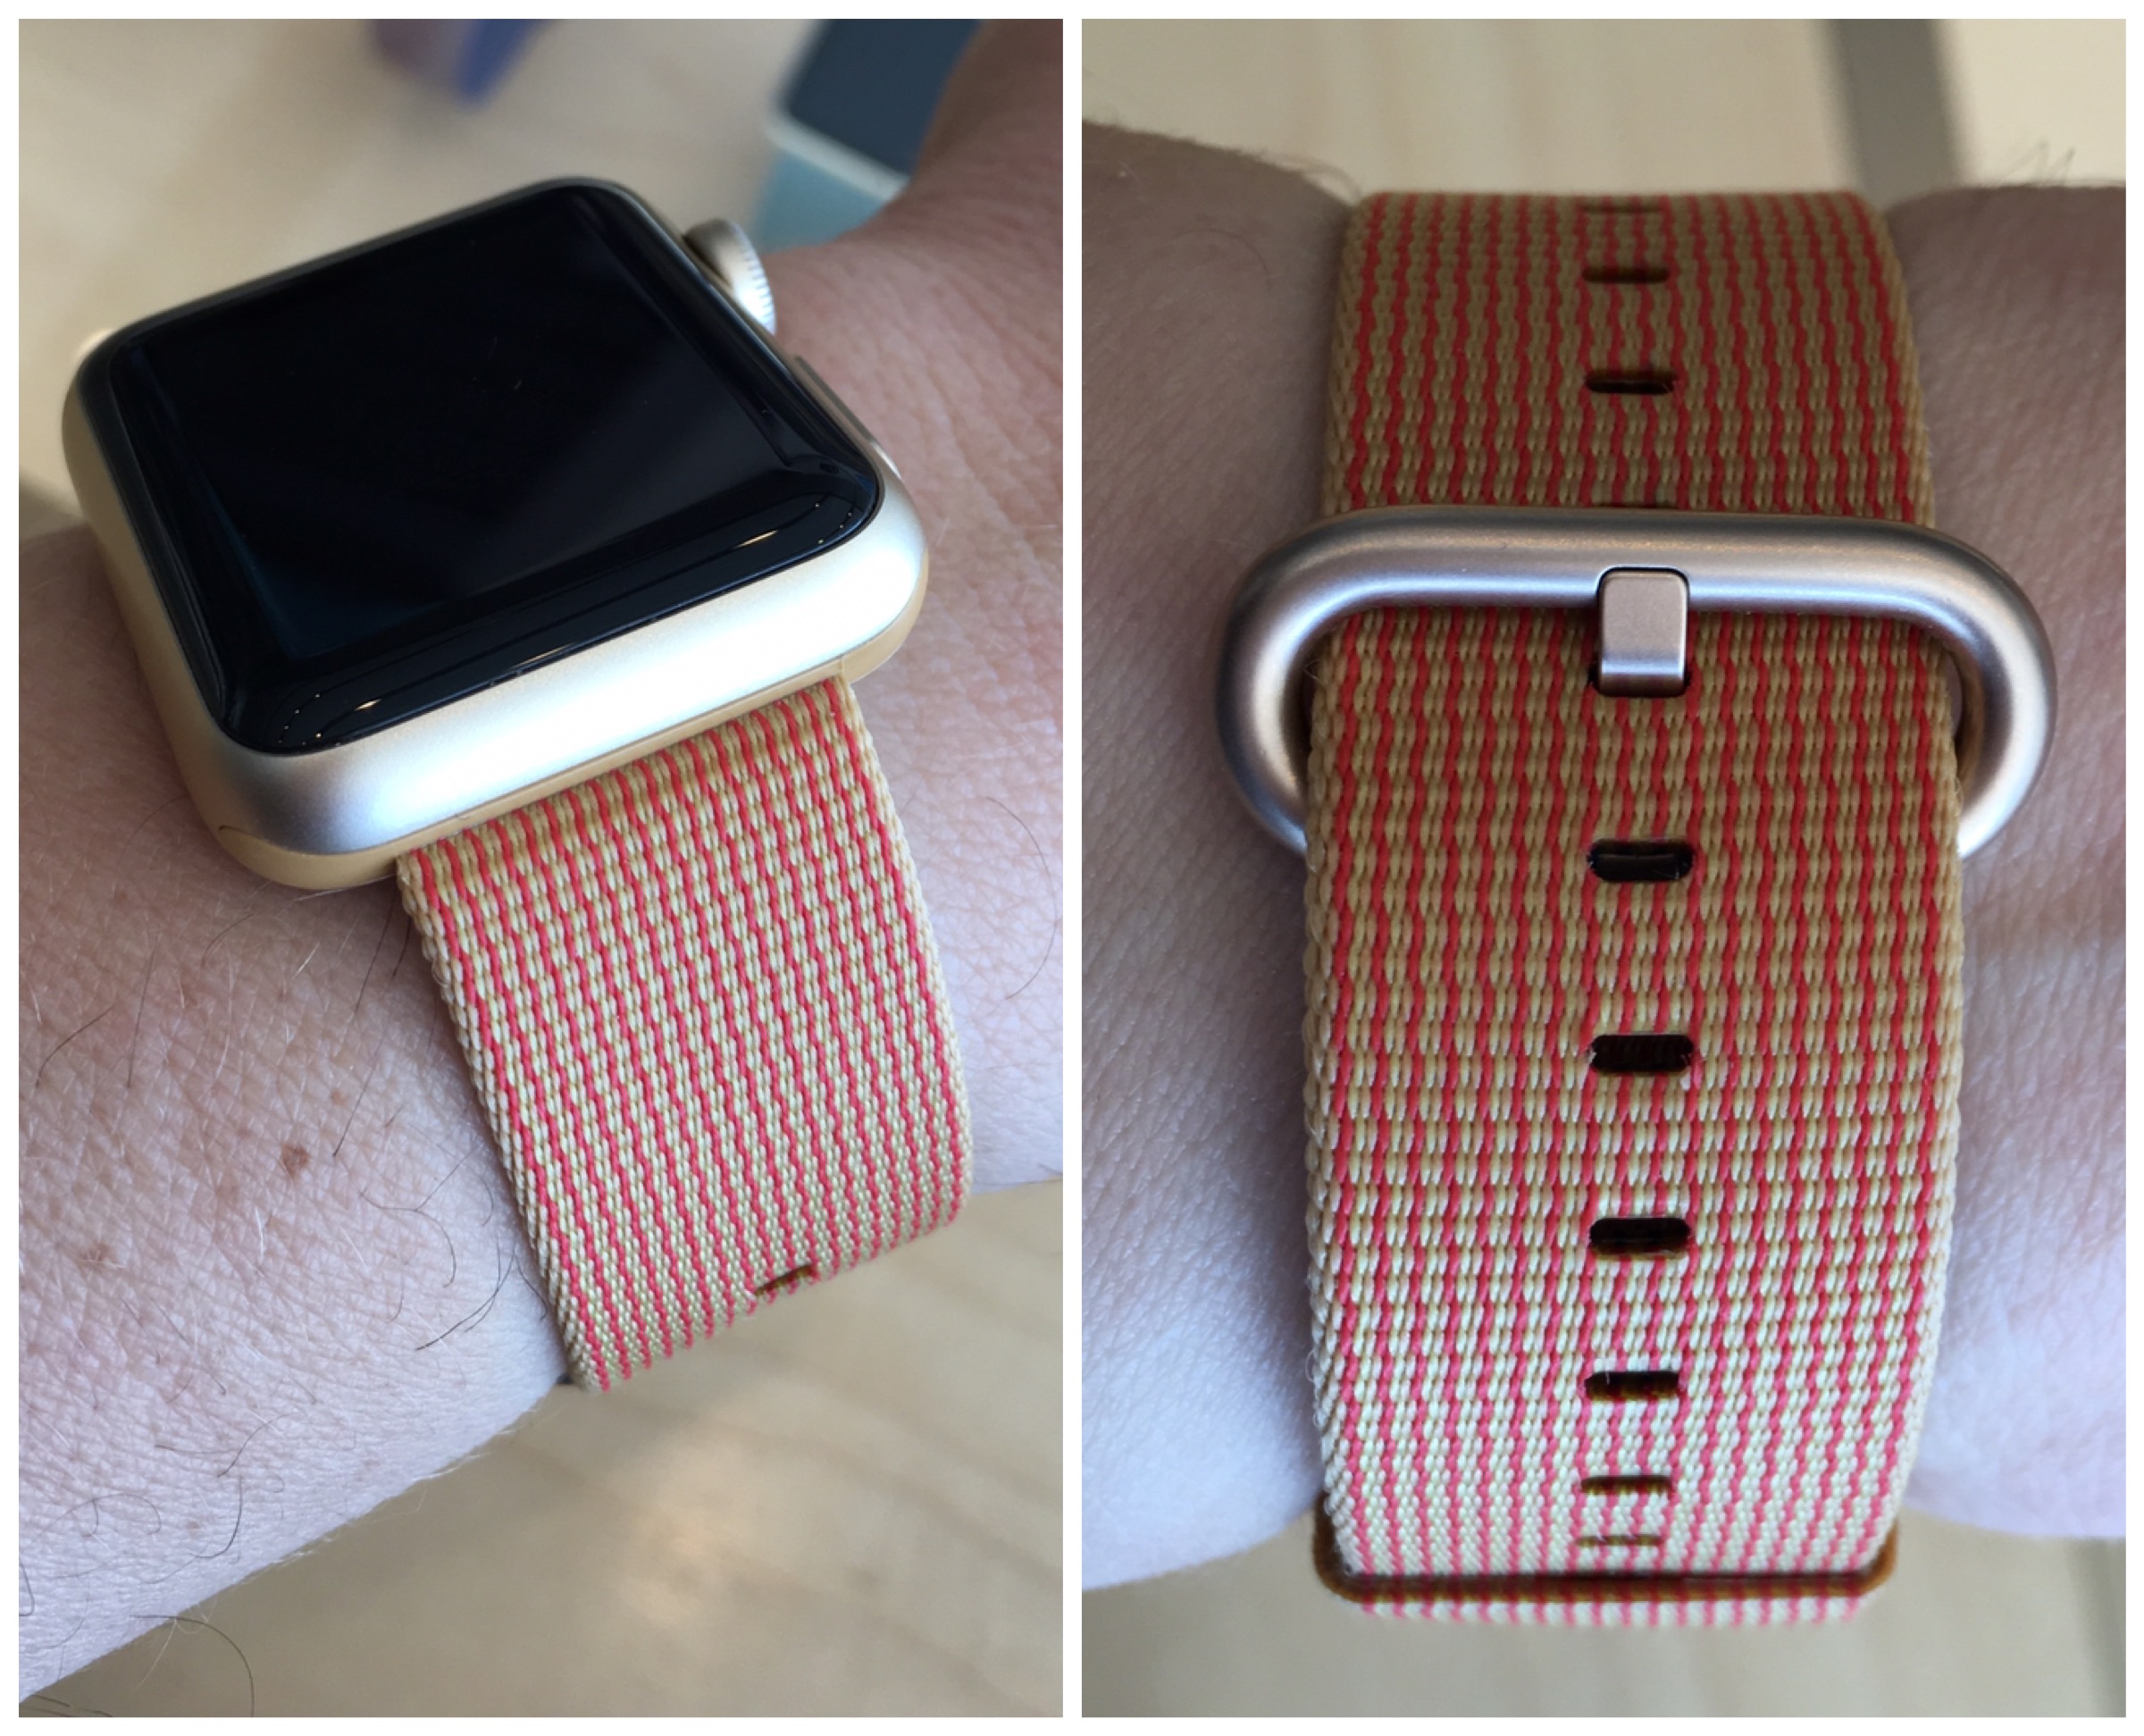 "A year after its launch, it’s now clear that pretty much no one needs an Apple Watch"